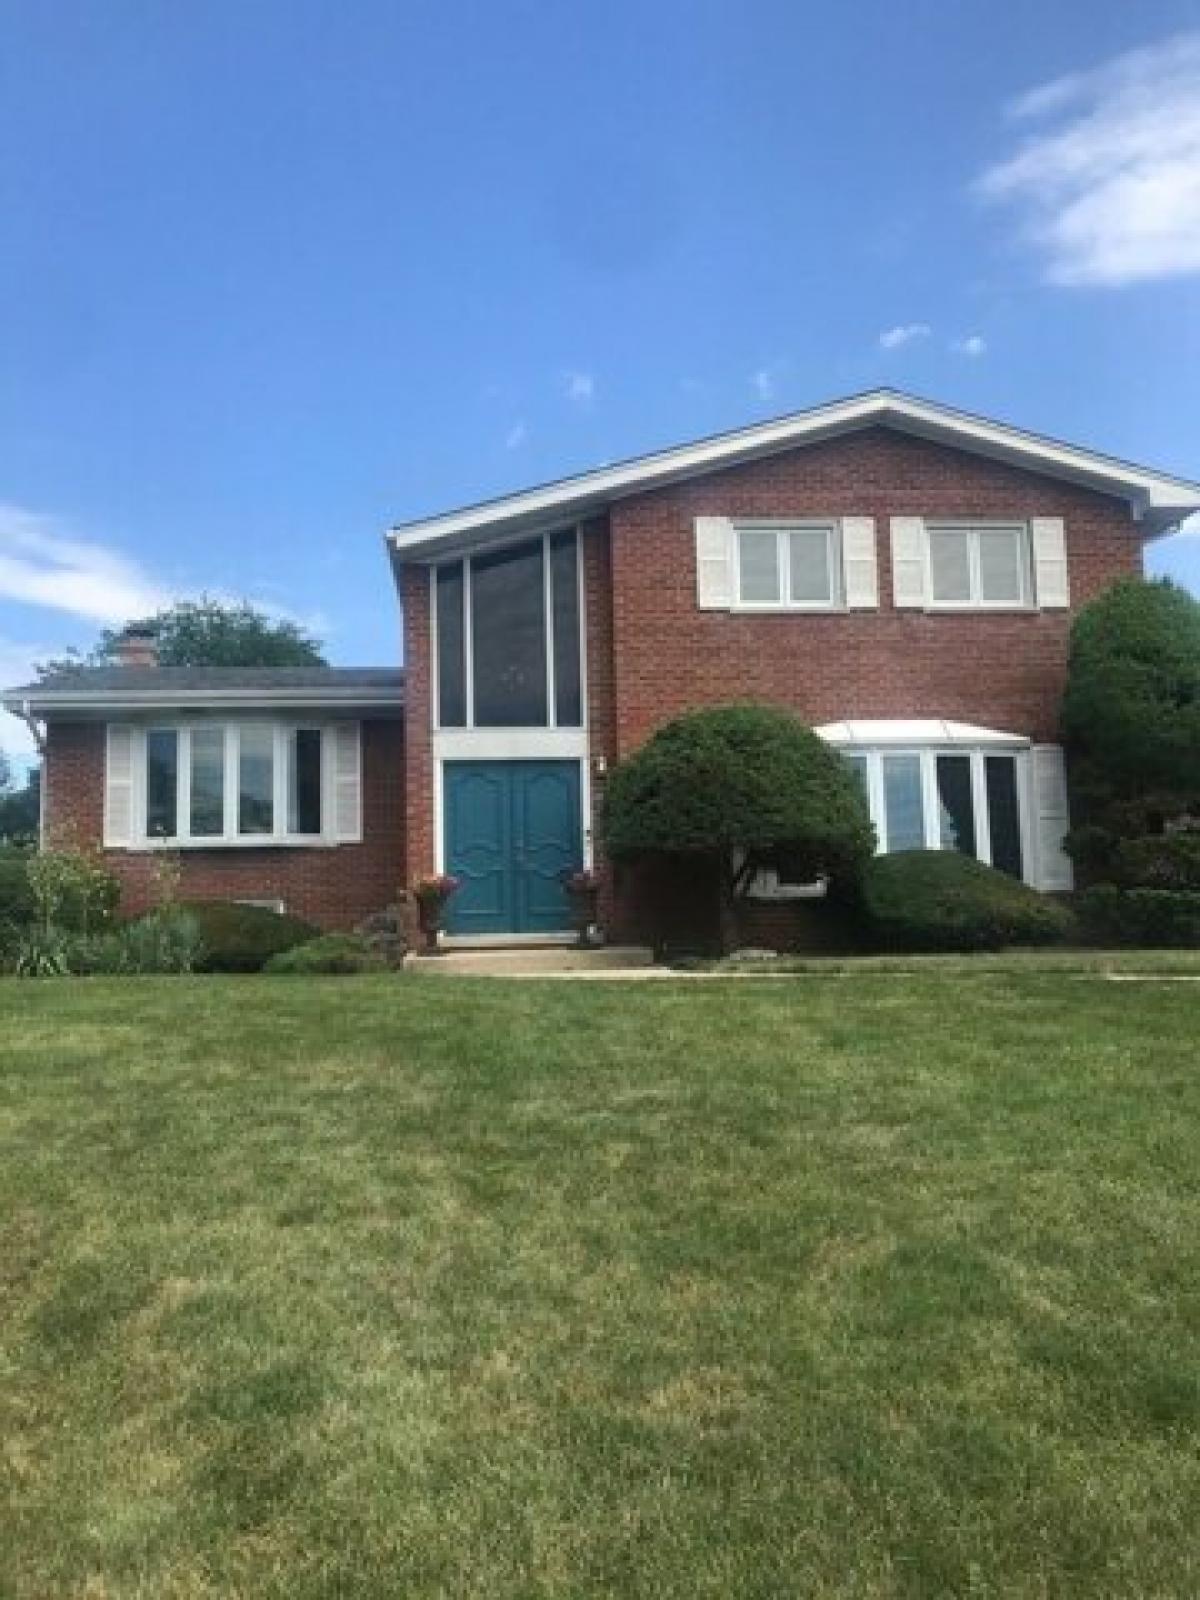 Picture of Home For Rent in Clarendon Hills, Illinois, United States